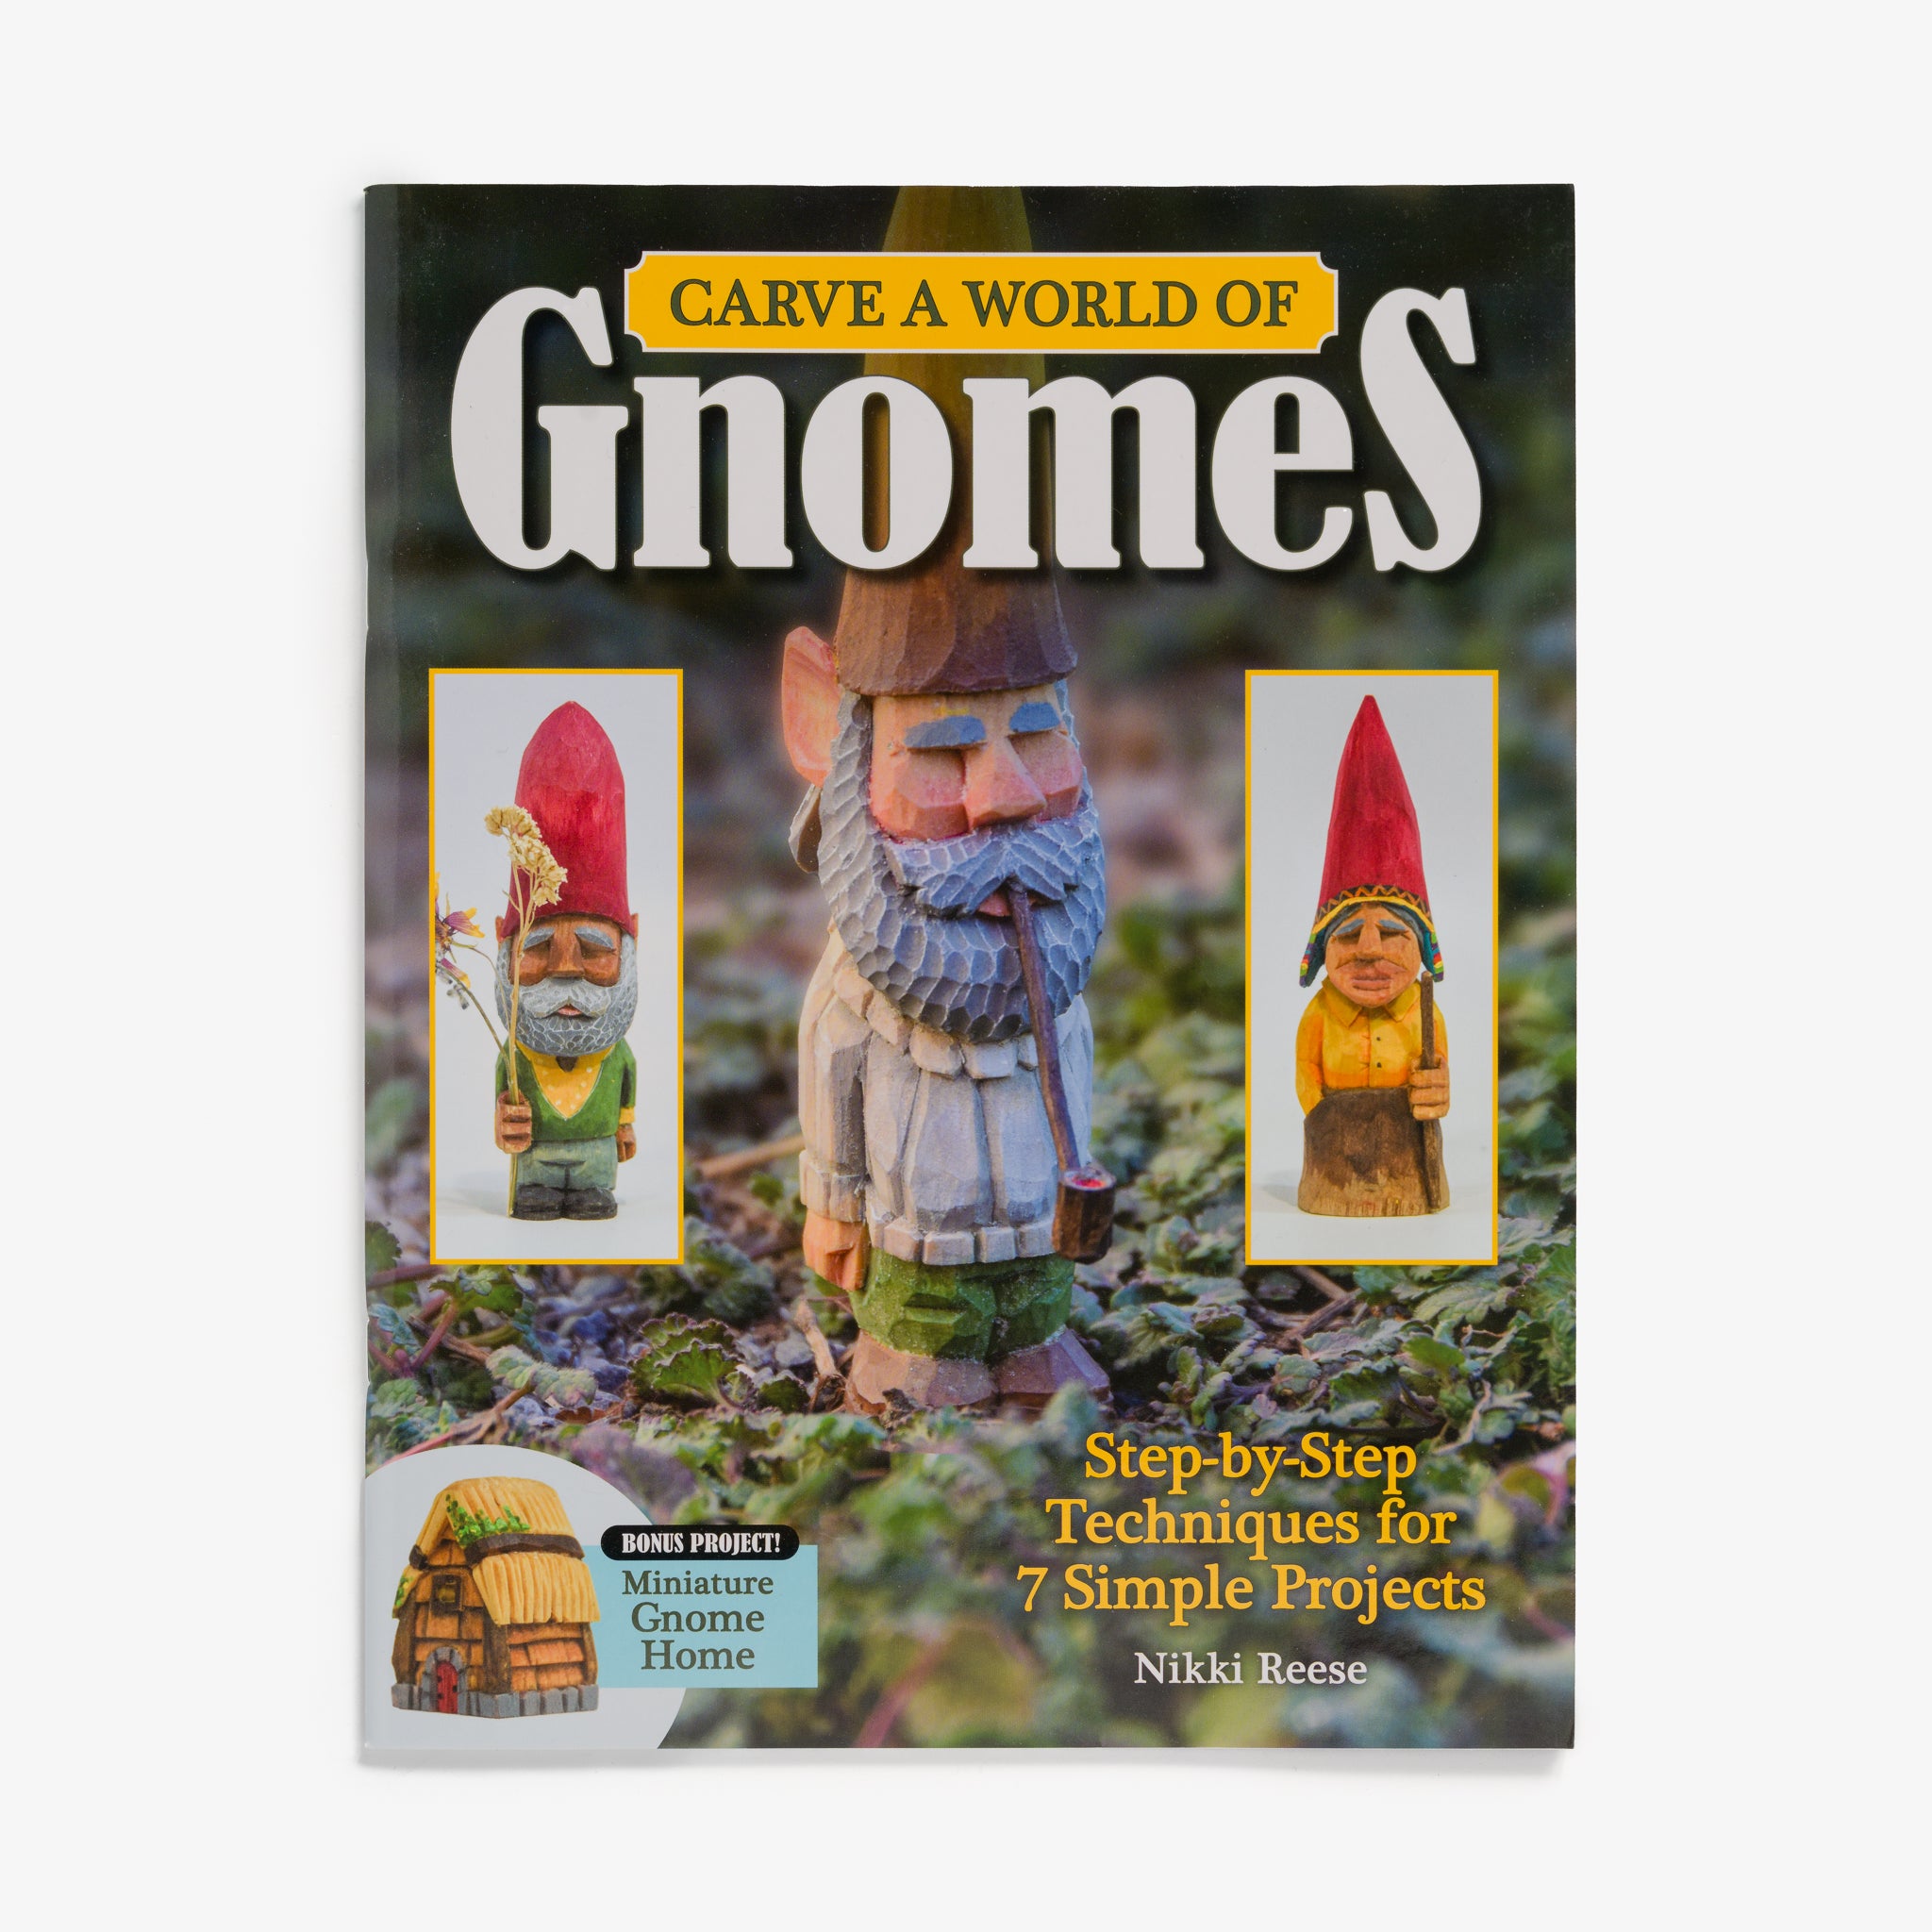 Carve a World of Gnomes by Nikki Reese